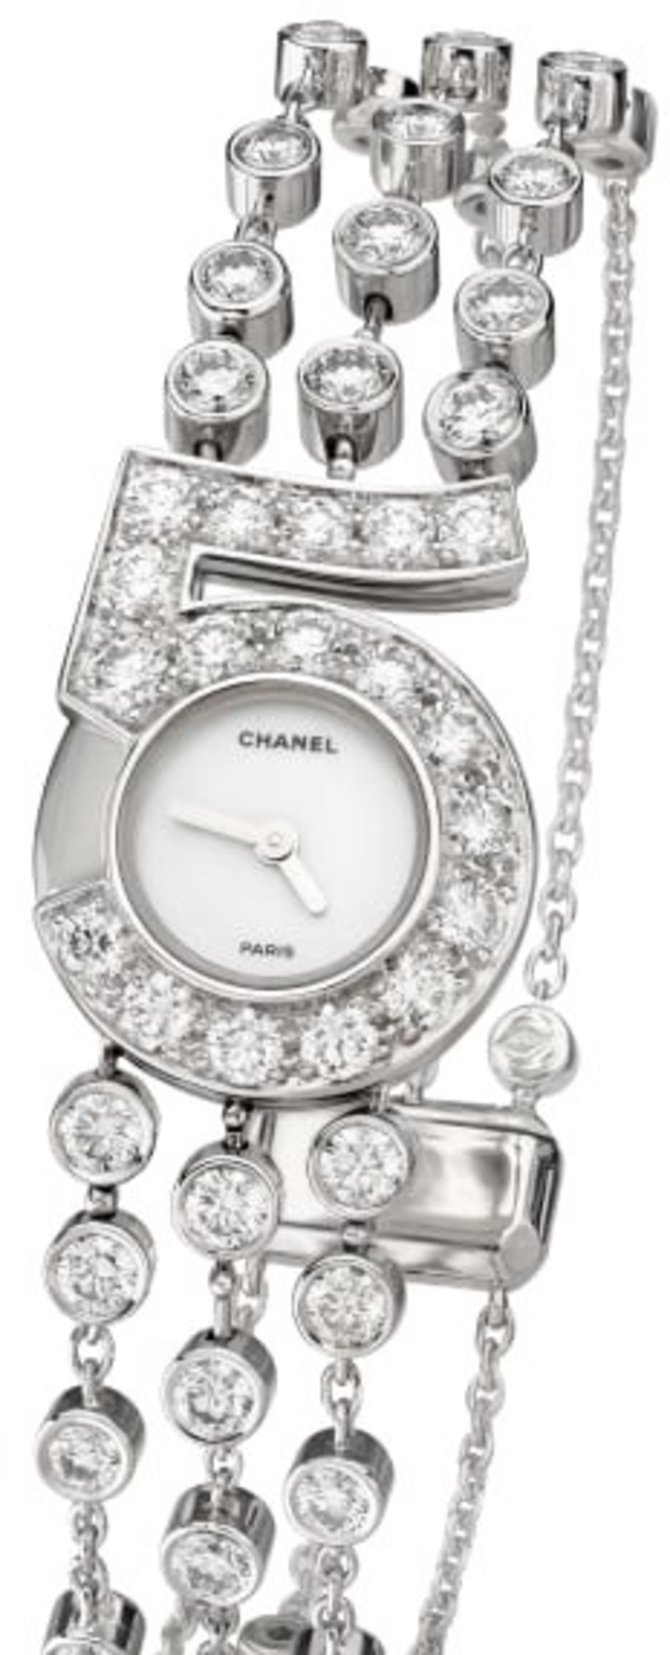 Chanel J64259 Jewelry watches Jewellery Collection Gioiello N5